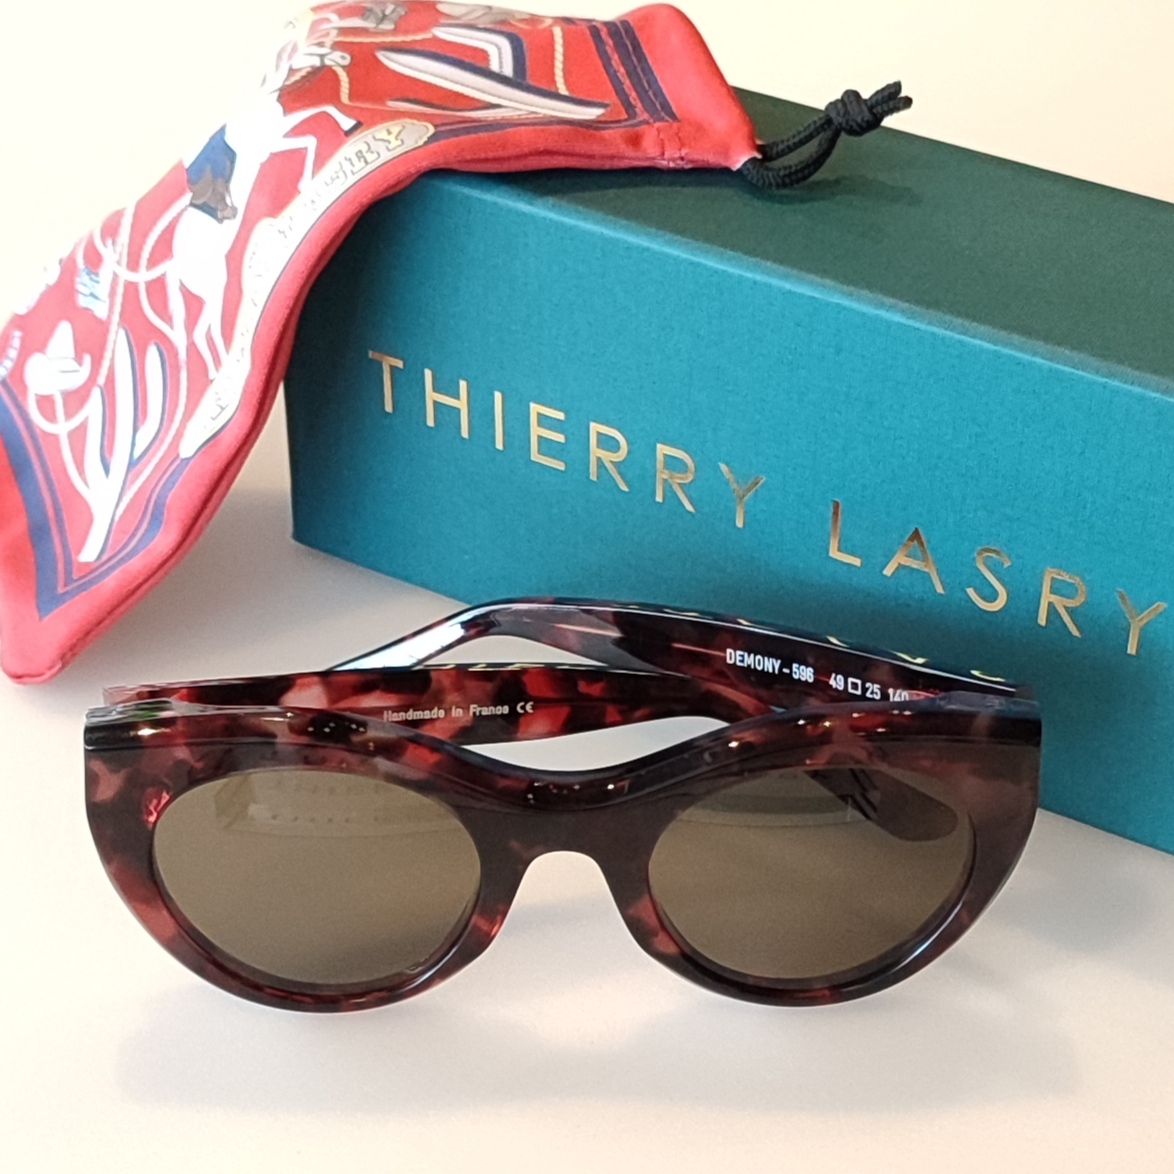 Theirry Lasry Demony frame in colour 596